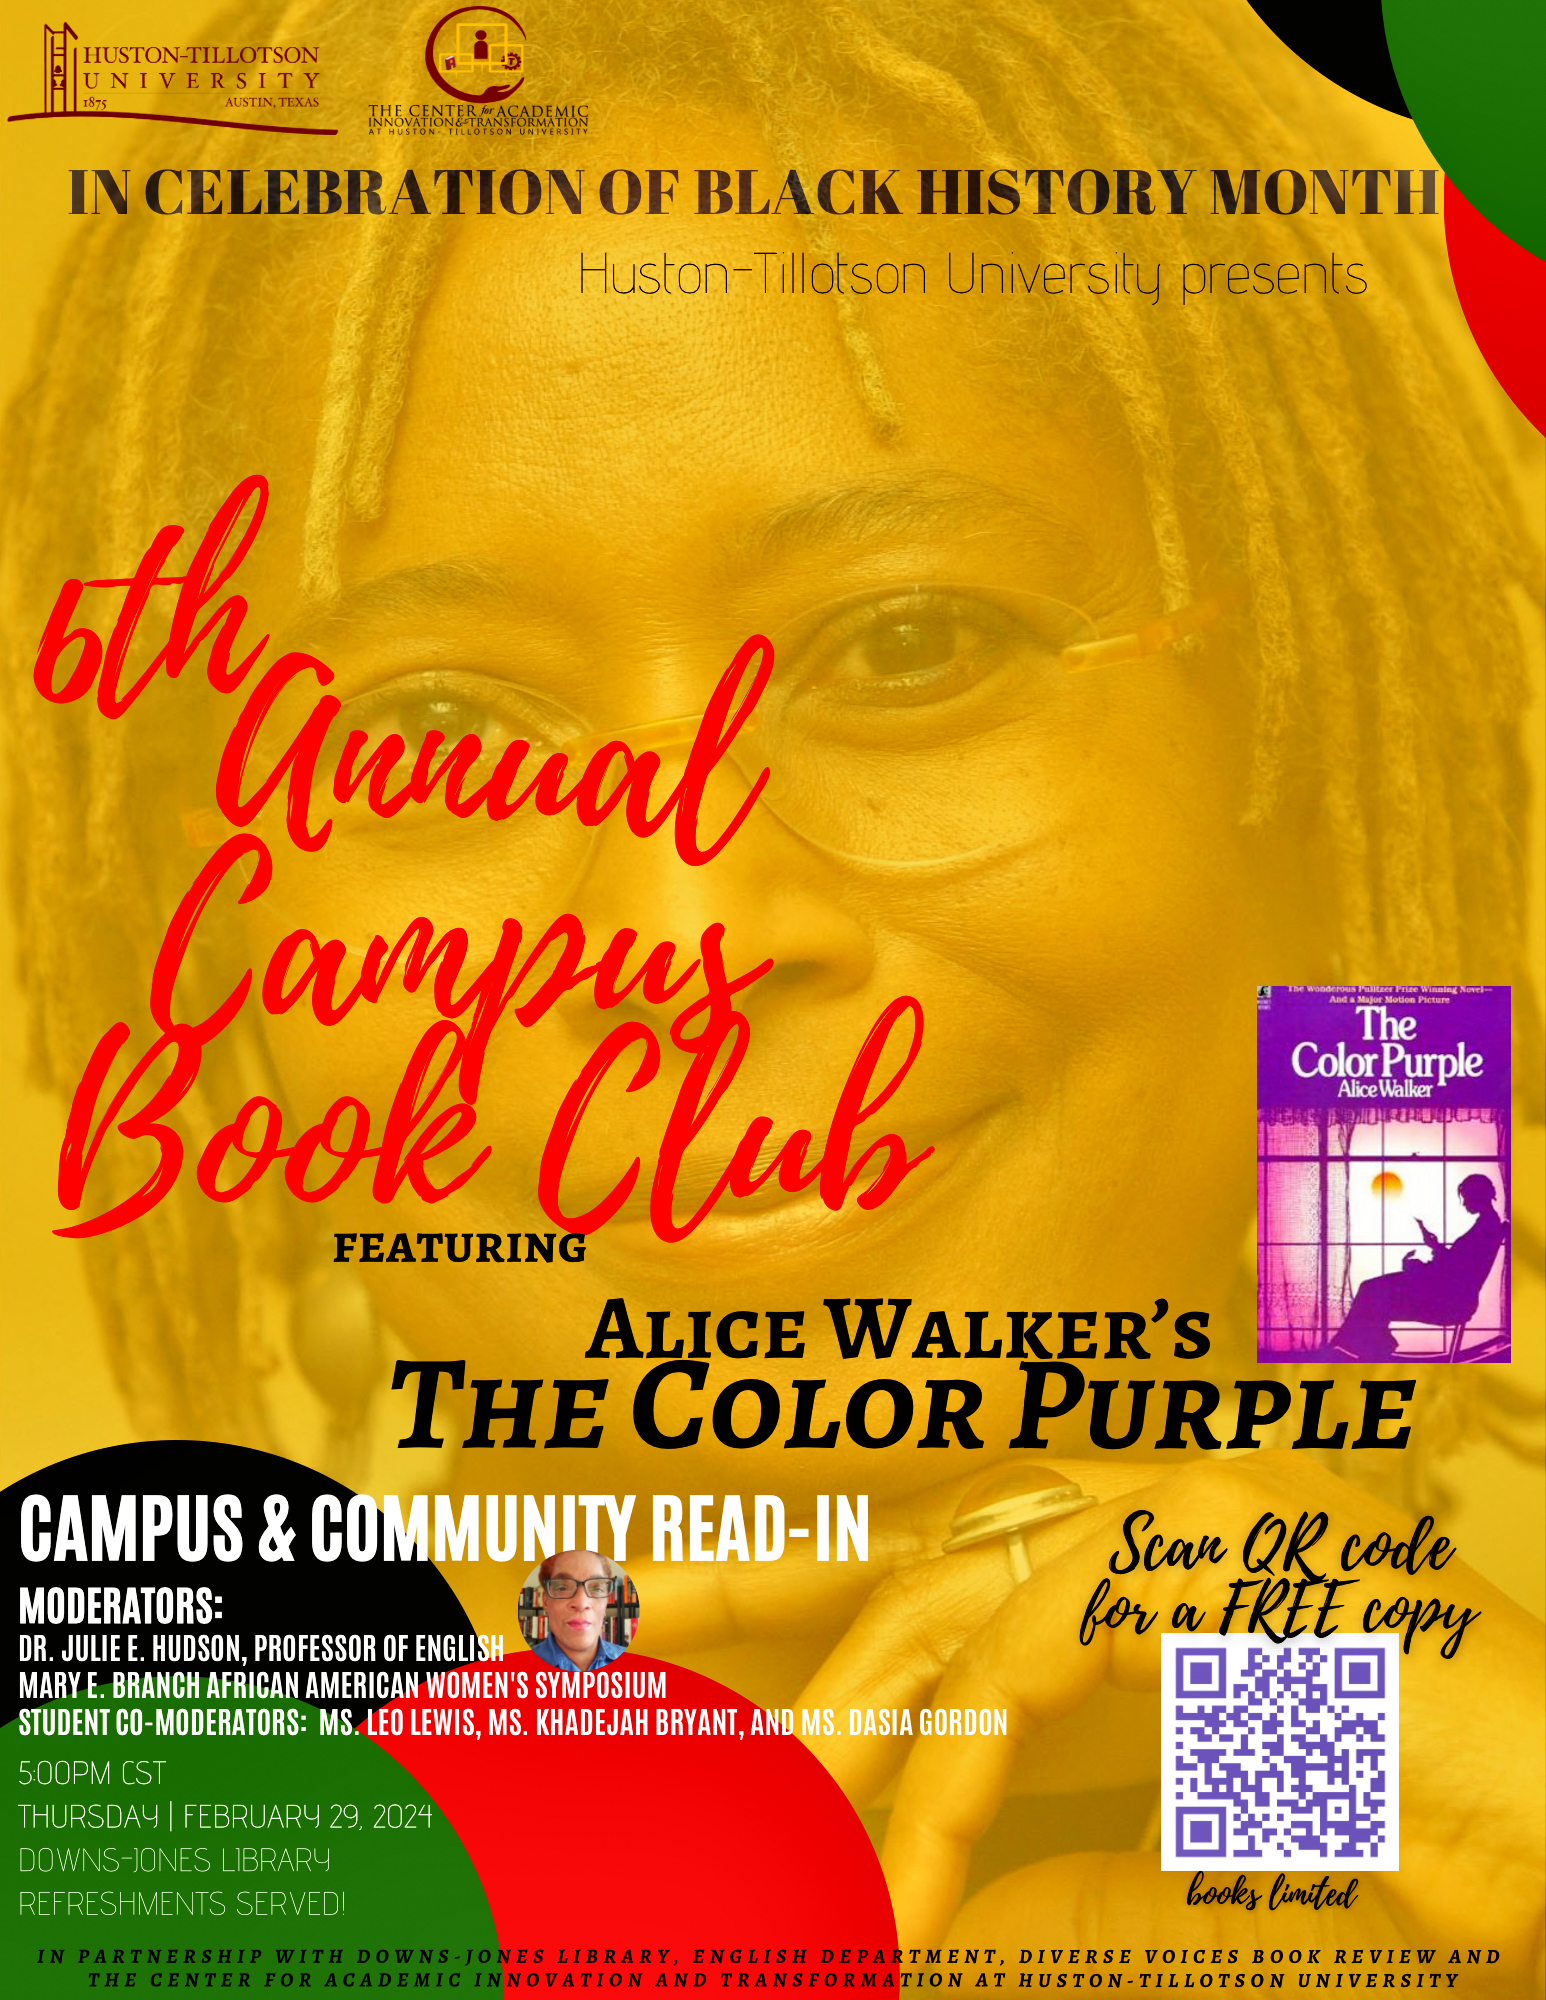 Yellow poster with red, black, and green accents promotes the 6th Annual Campus Book Club's reading of "The Color Purple" by Alice Walker